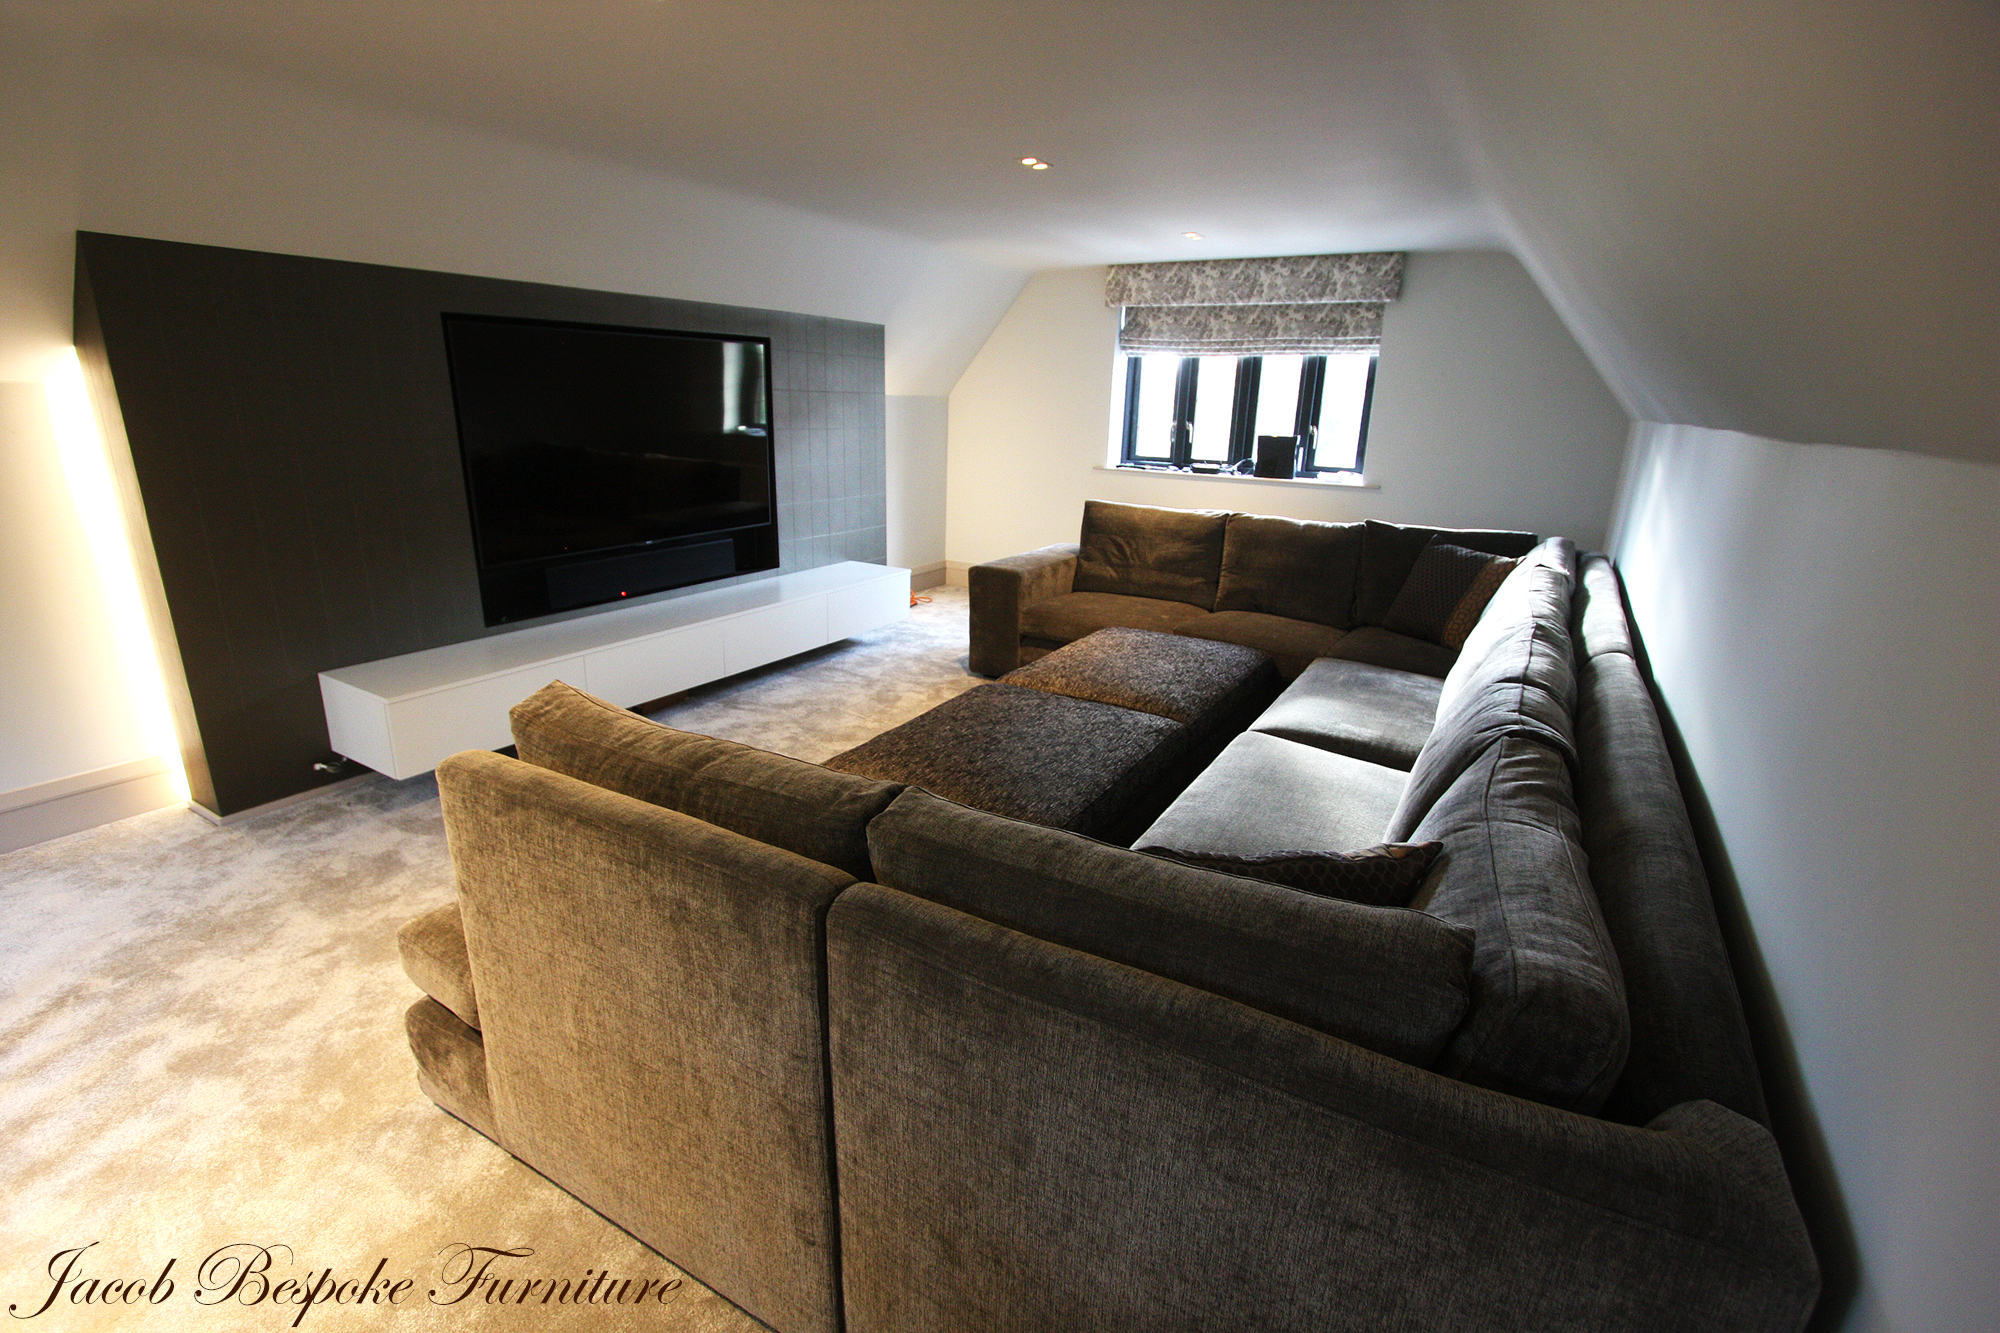 Bespoke cinema with in the comfort of your own home.